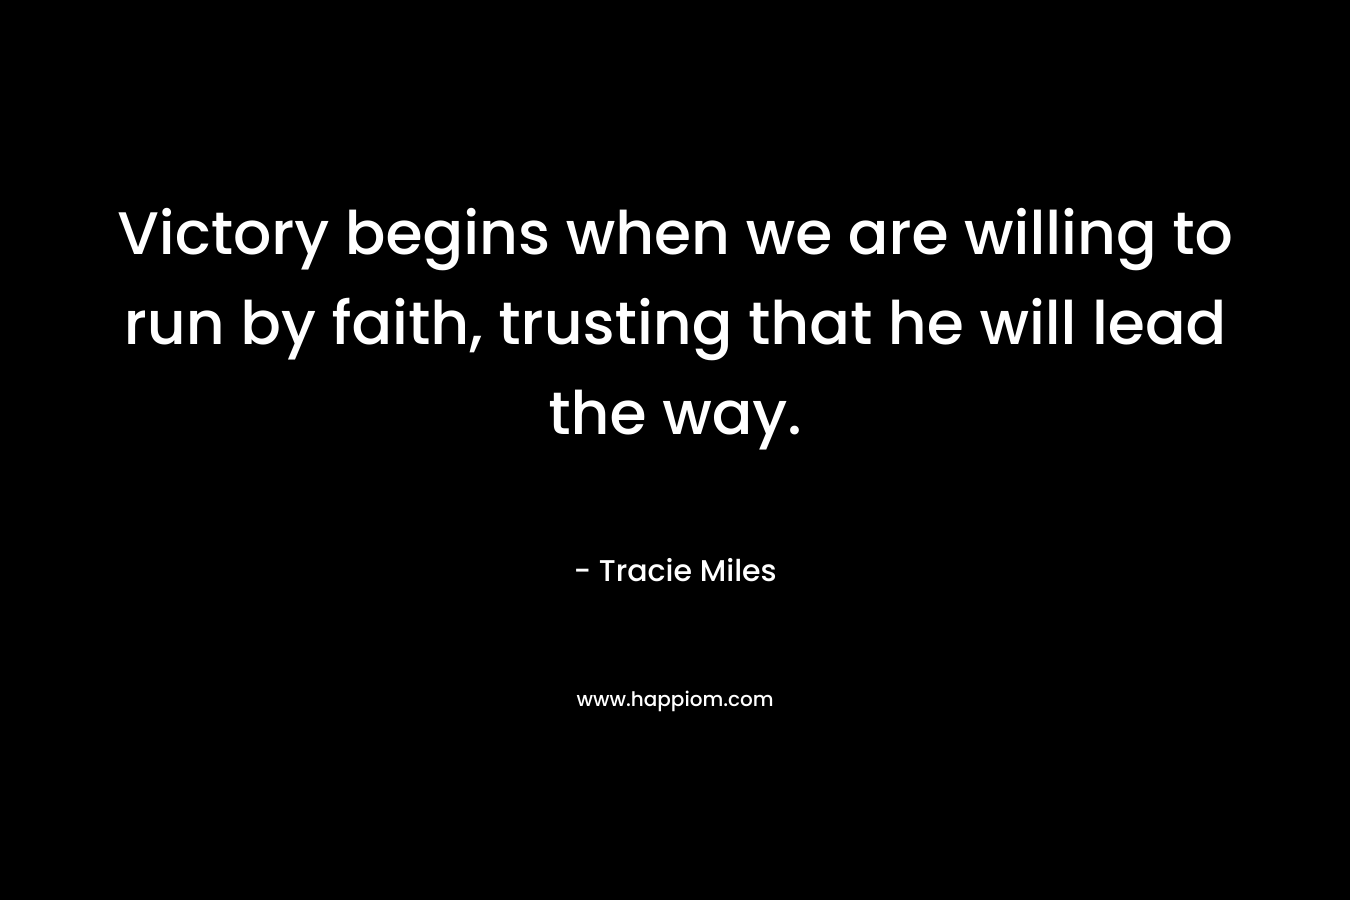 Victory begins when we are willing to run by faith, trusting that he will lead the way.